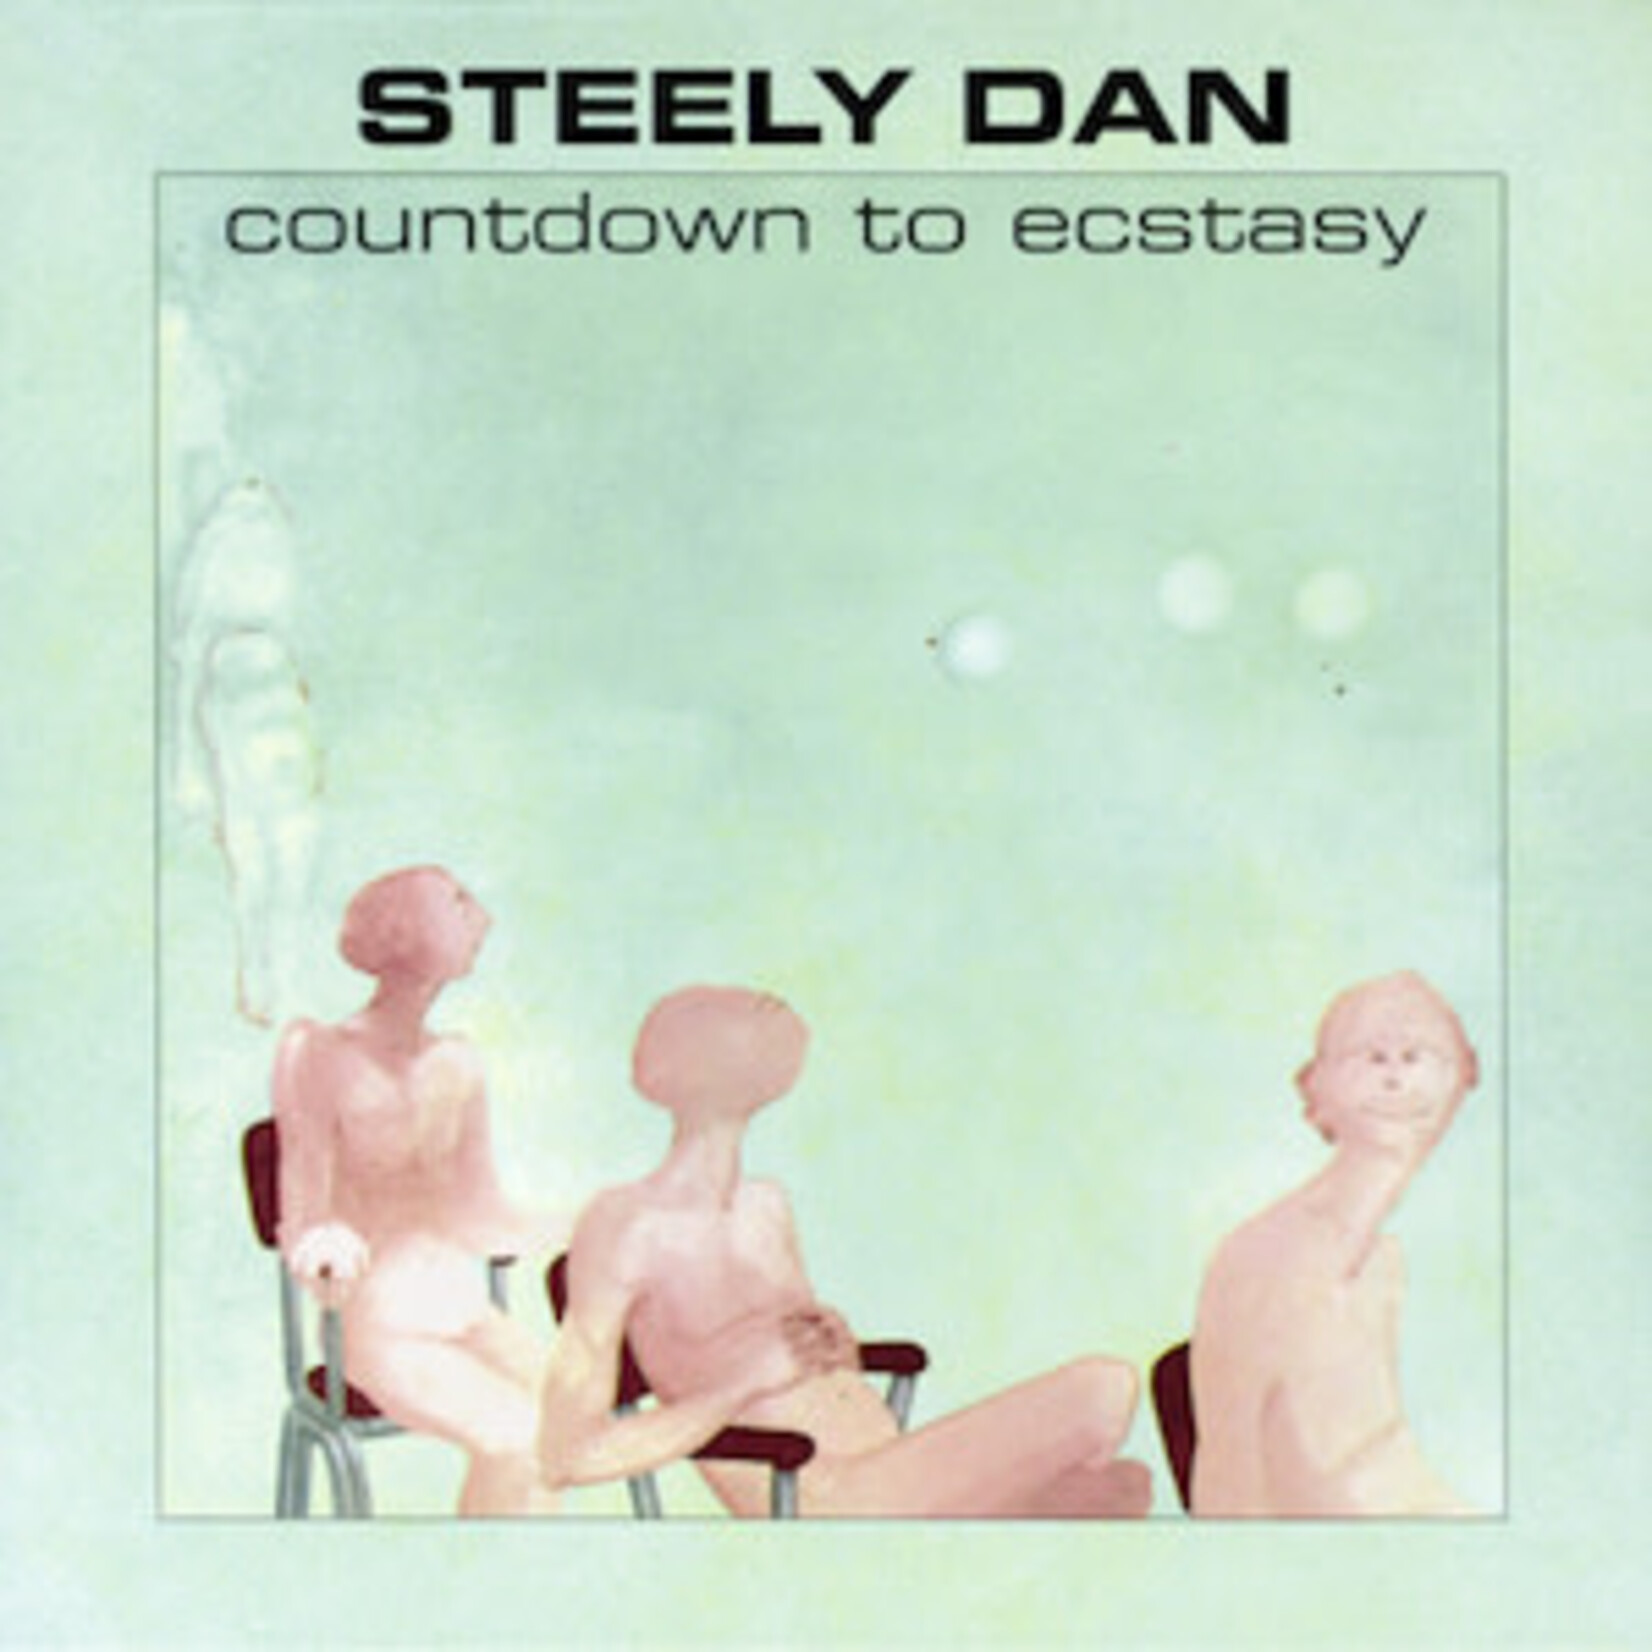 [New] Steely Dan - Countdown To Ecstasy (180g, remaster)